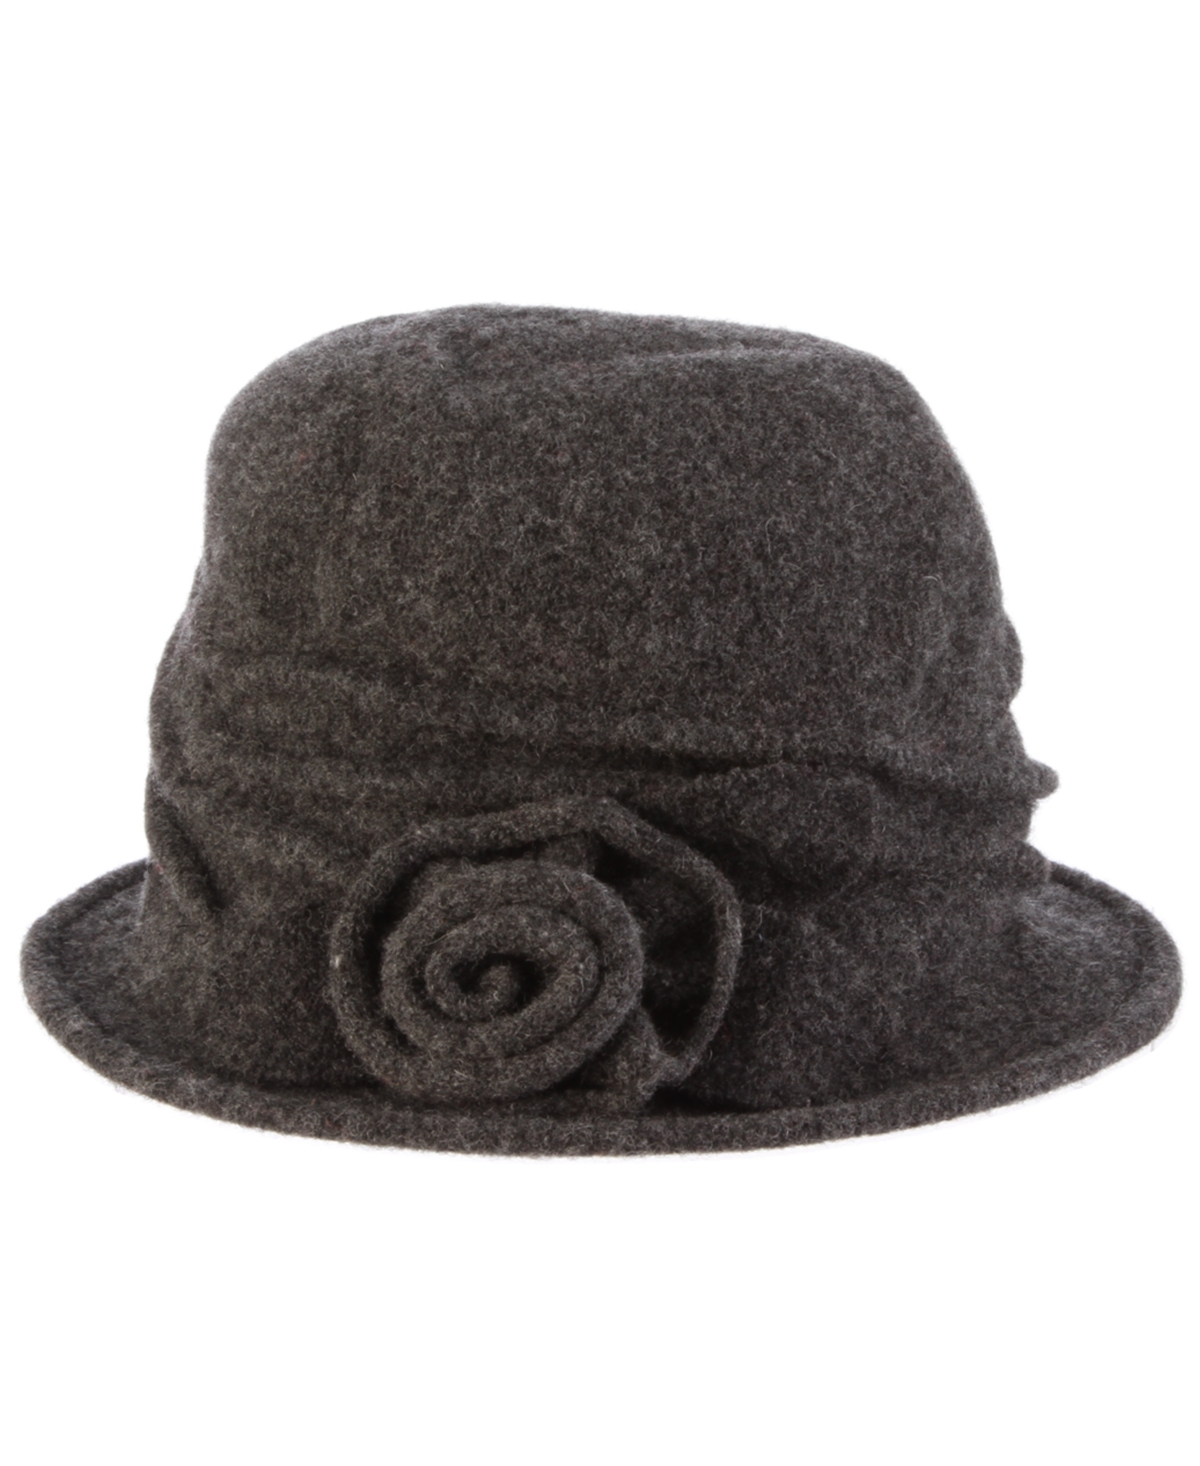 Dorfman Pacific Boiled Wool Cloche In Charcoal